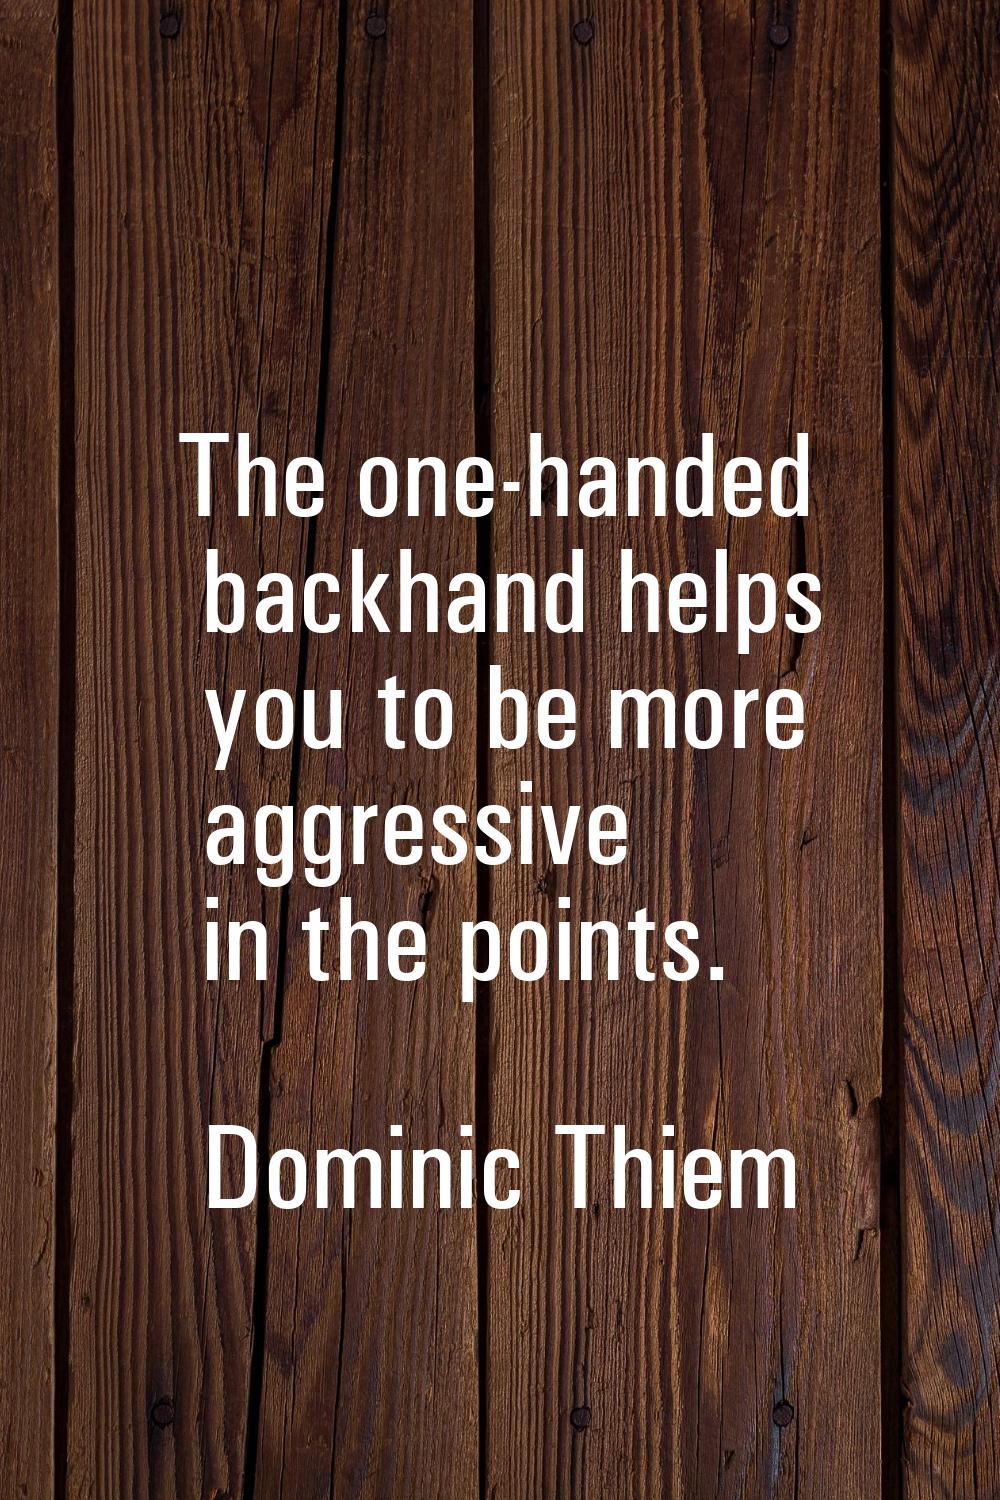 The one-handed backhand helps you to be more aggressive in the points.